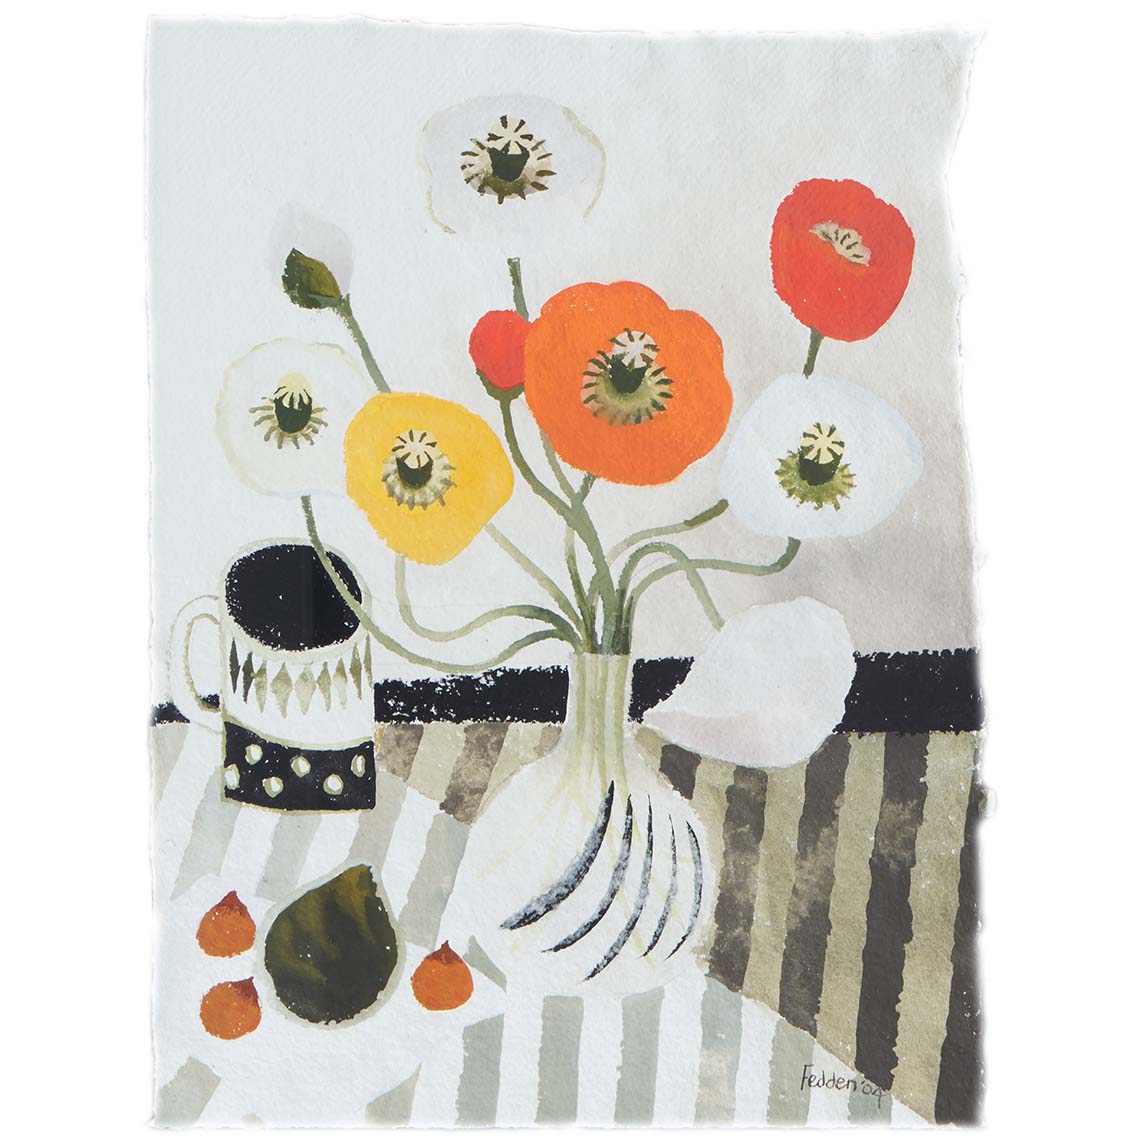 MARY FEDDEN. POPPIES. 2004. SOLD